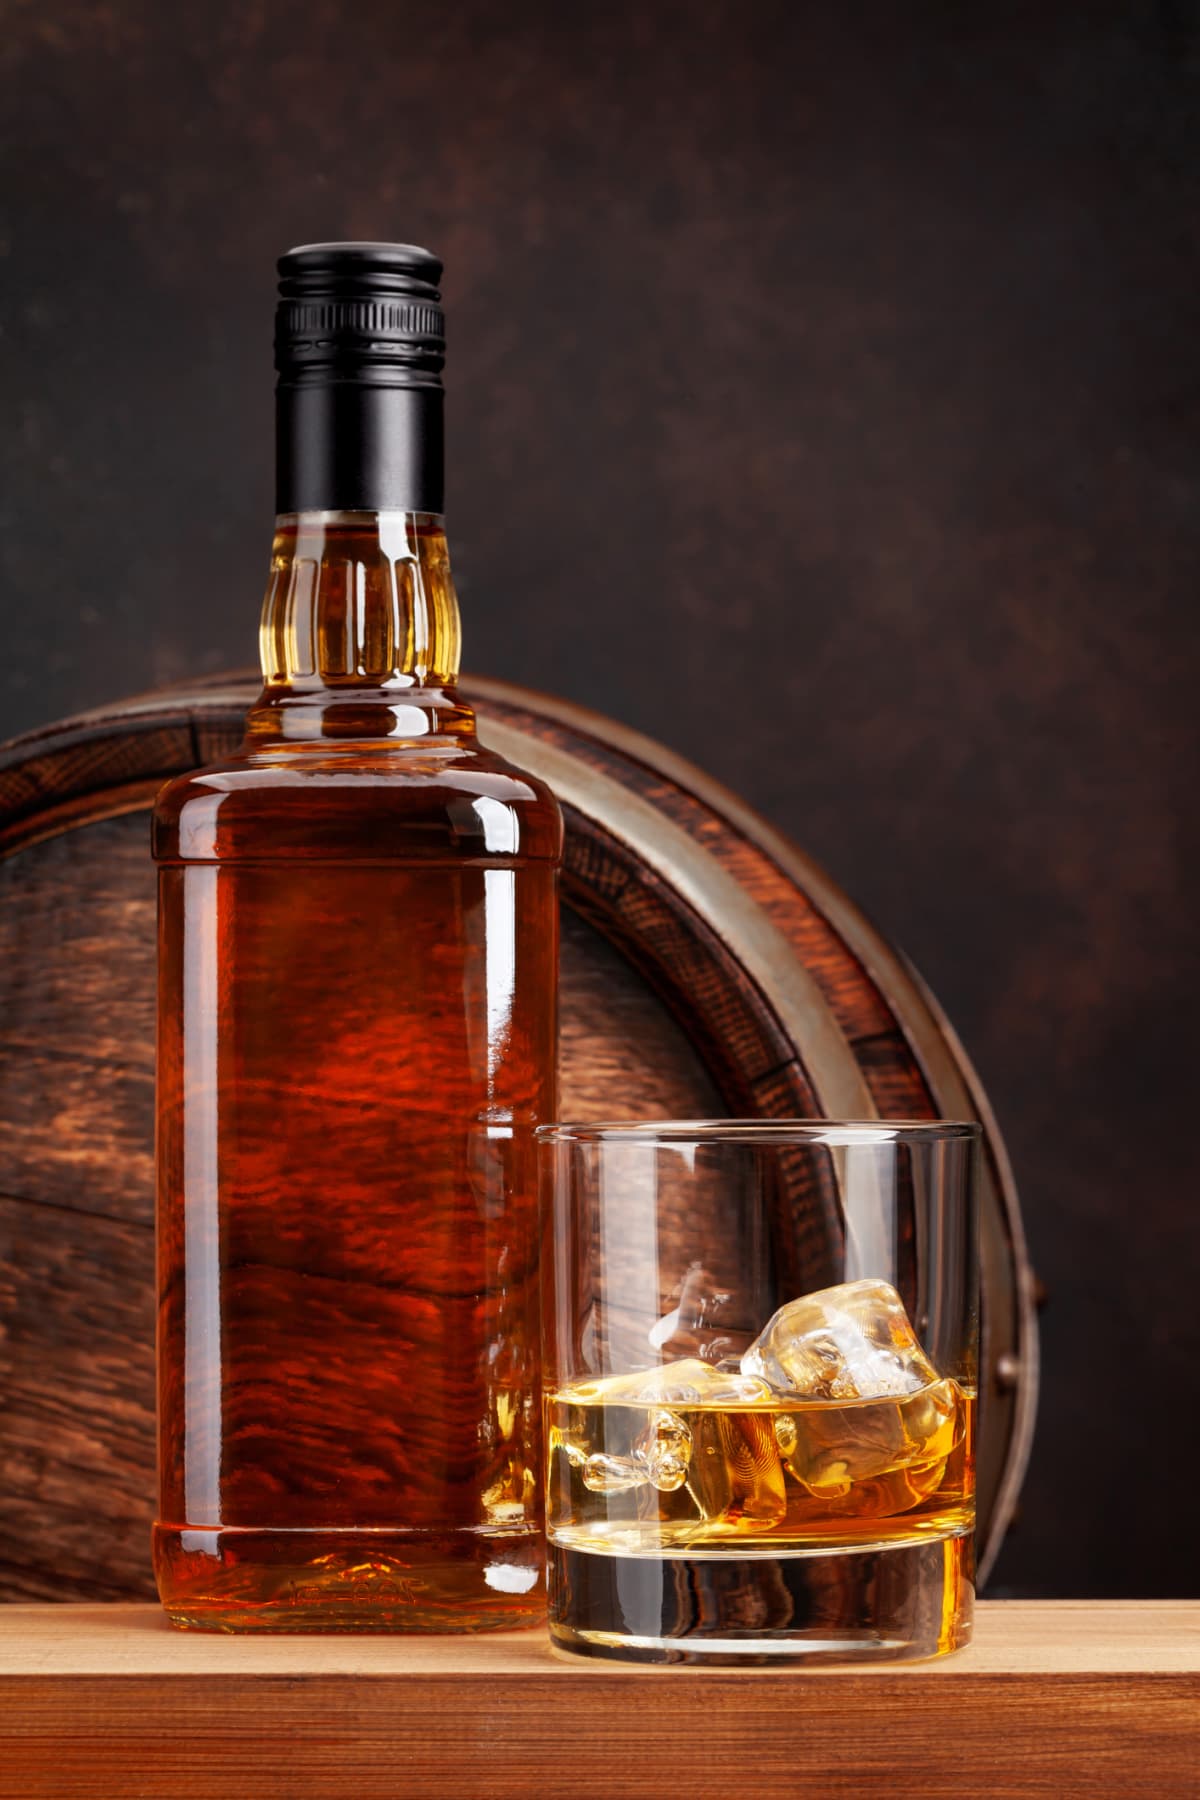 Scotch whiskey bottle, glass, and old wooden barrel